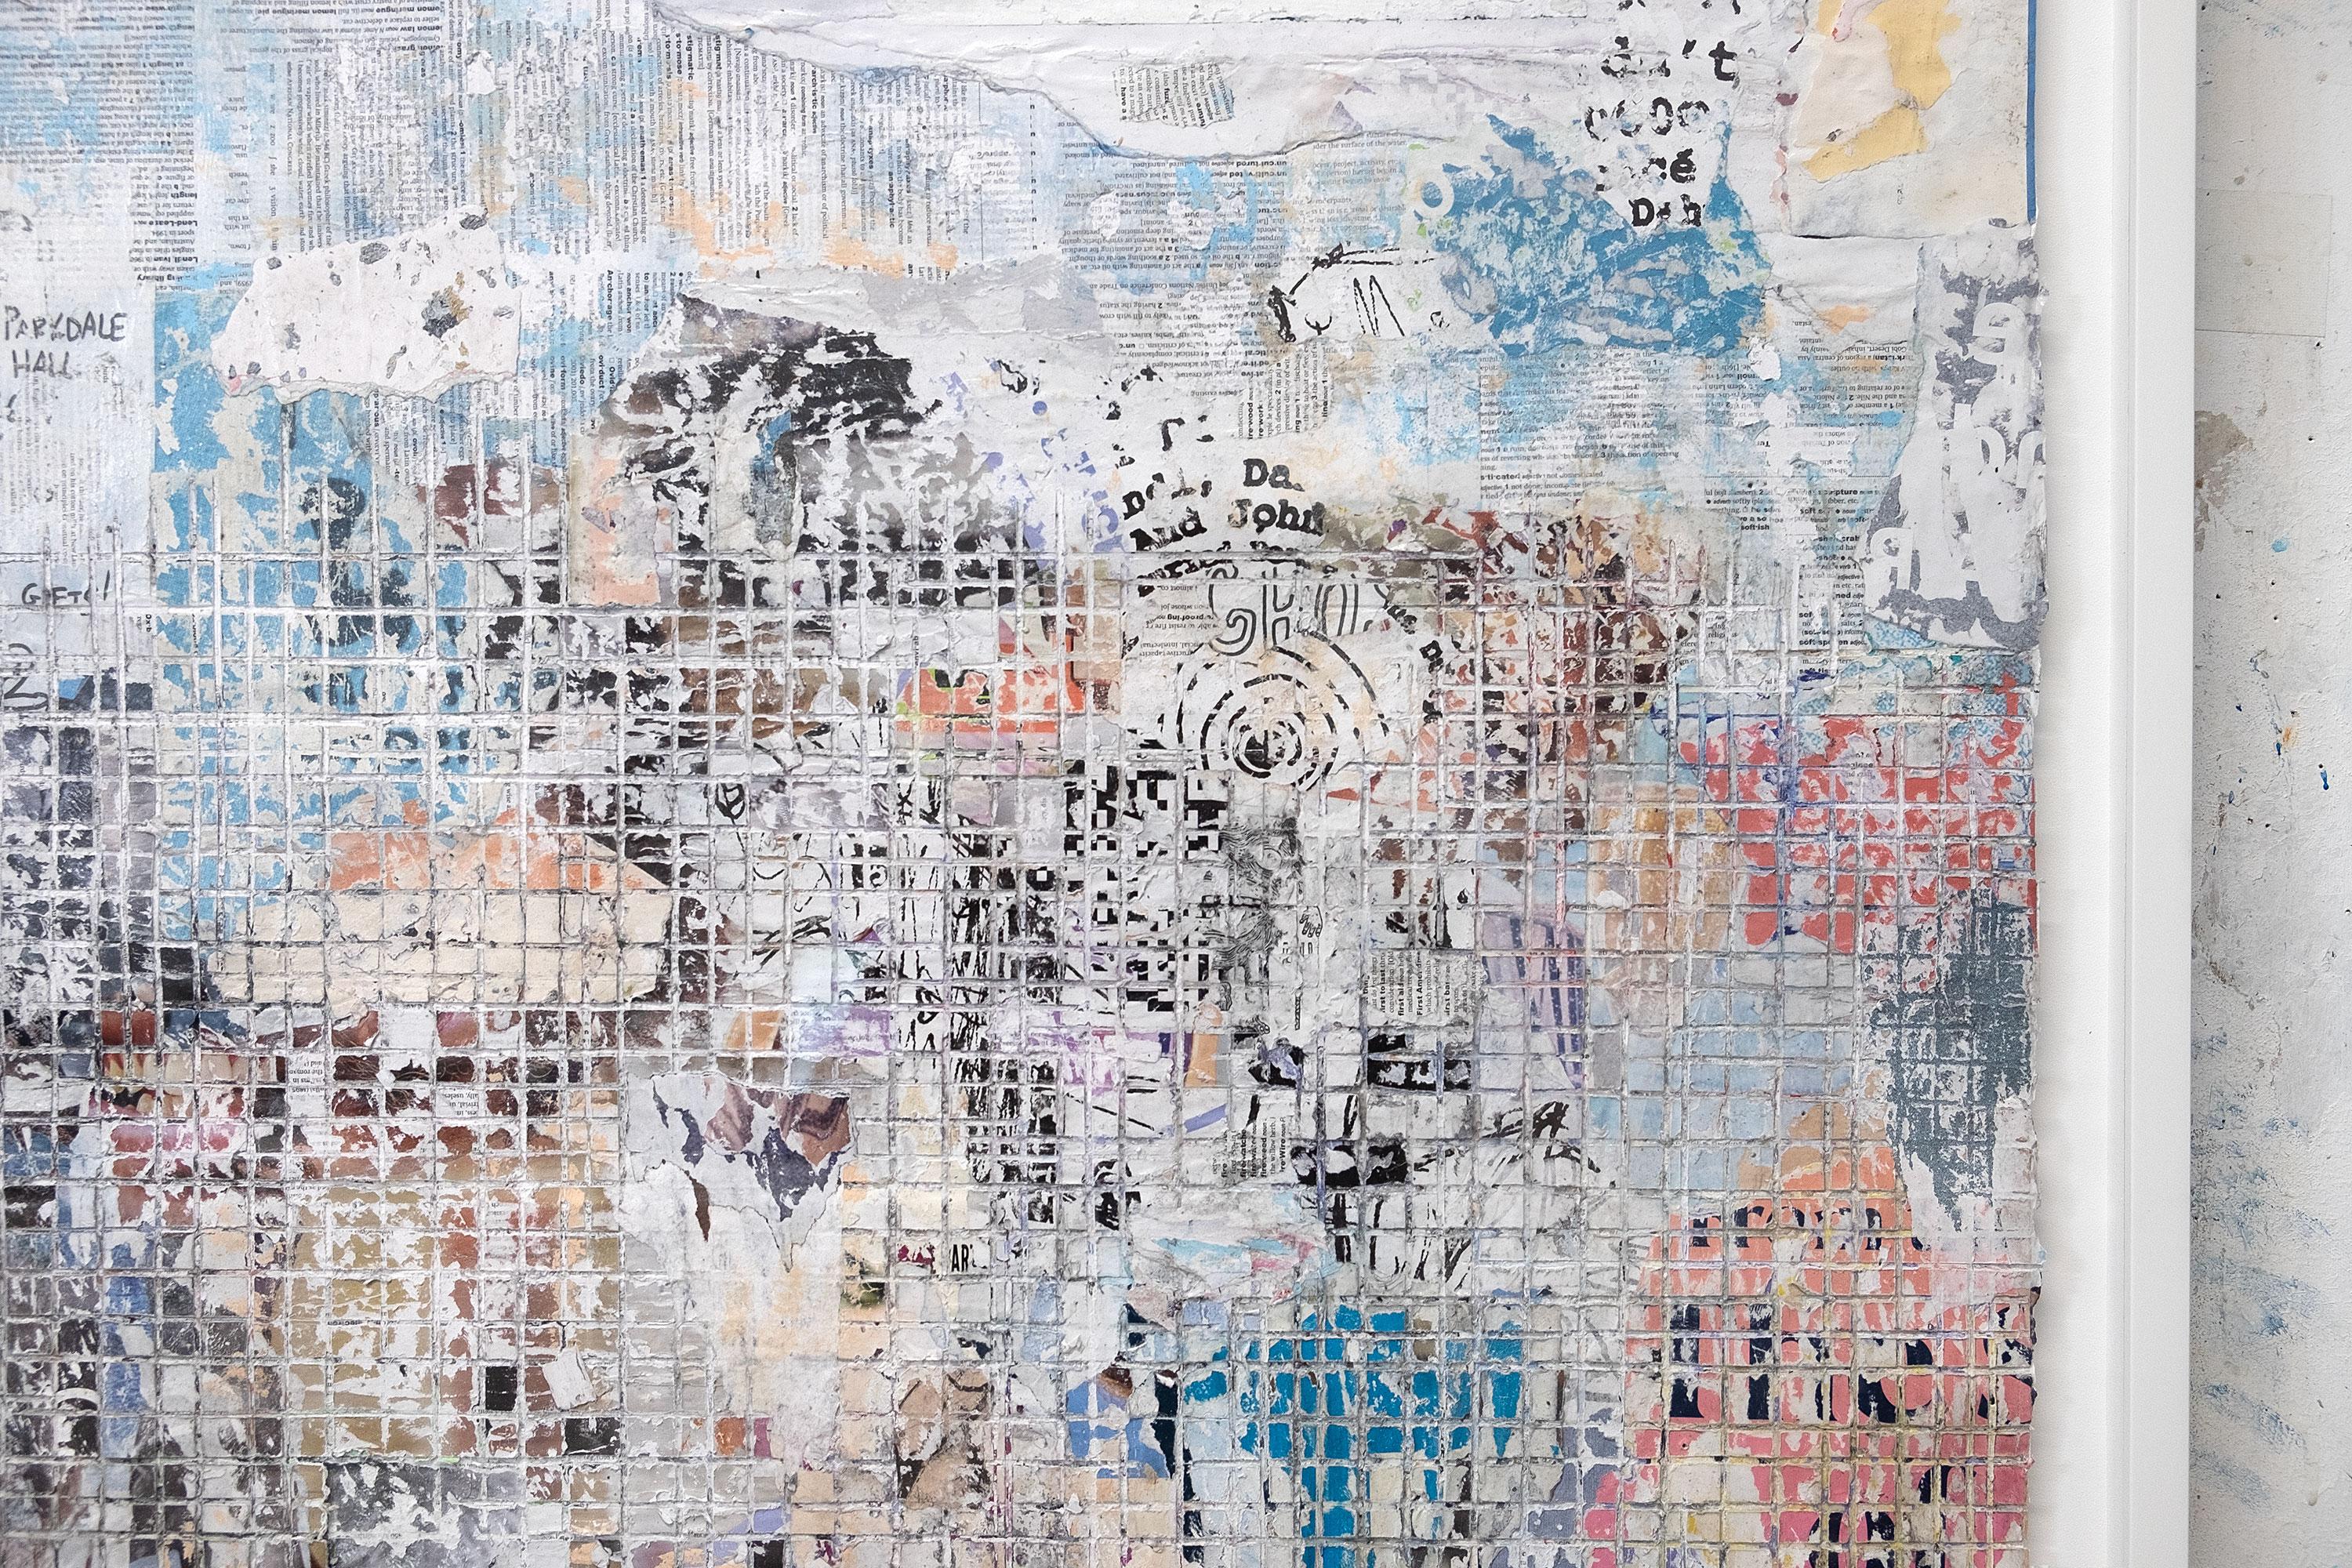 David Fredrik Moussallem’s mixed-media abstract paintings tell different “stories from the streets” and respond to urban landscape.  His palette is soft, mainly using white, beige and blue that mimic the surface of peeling city walls.

Extensive